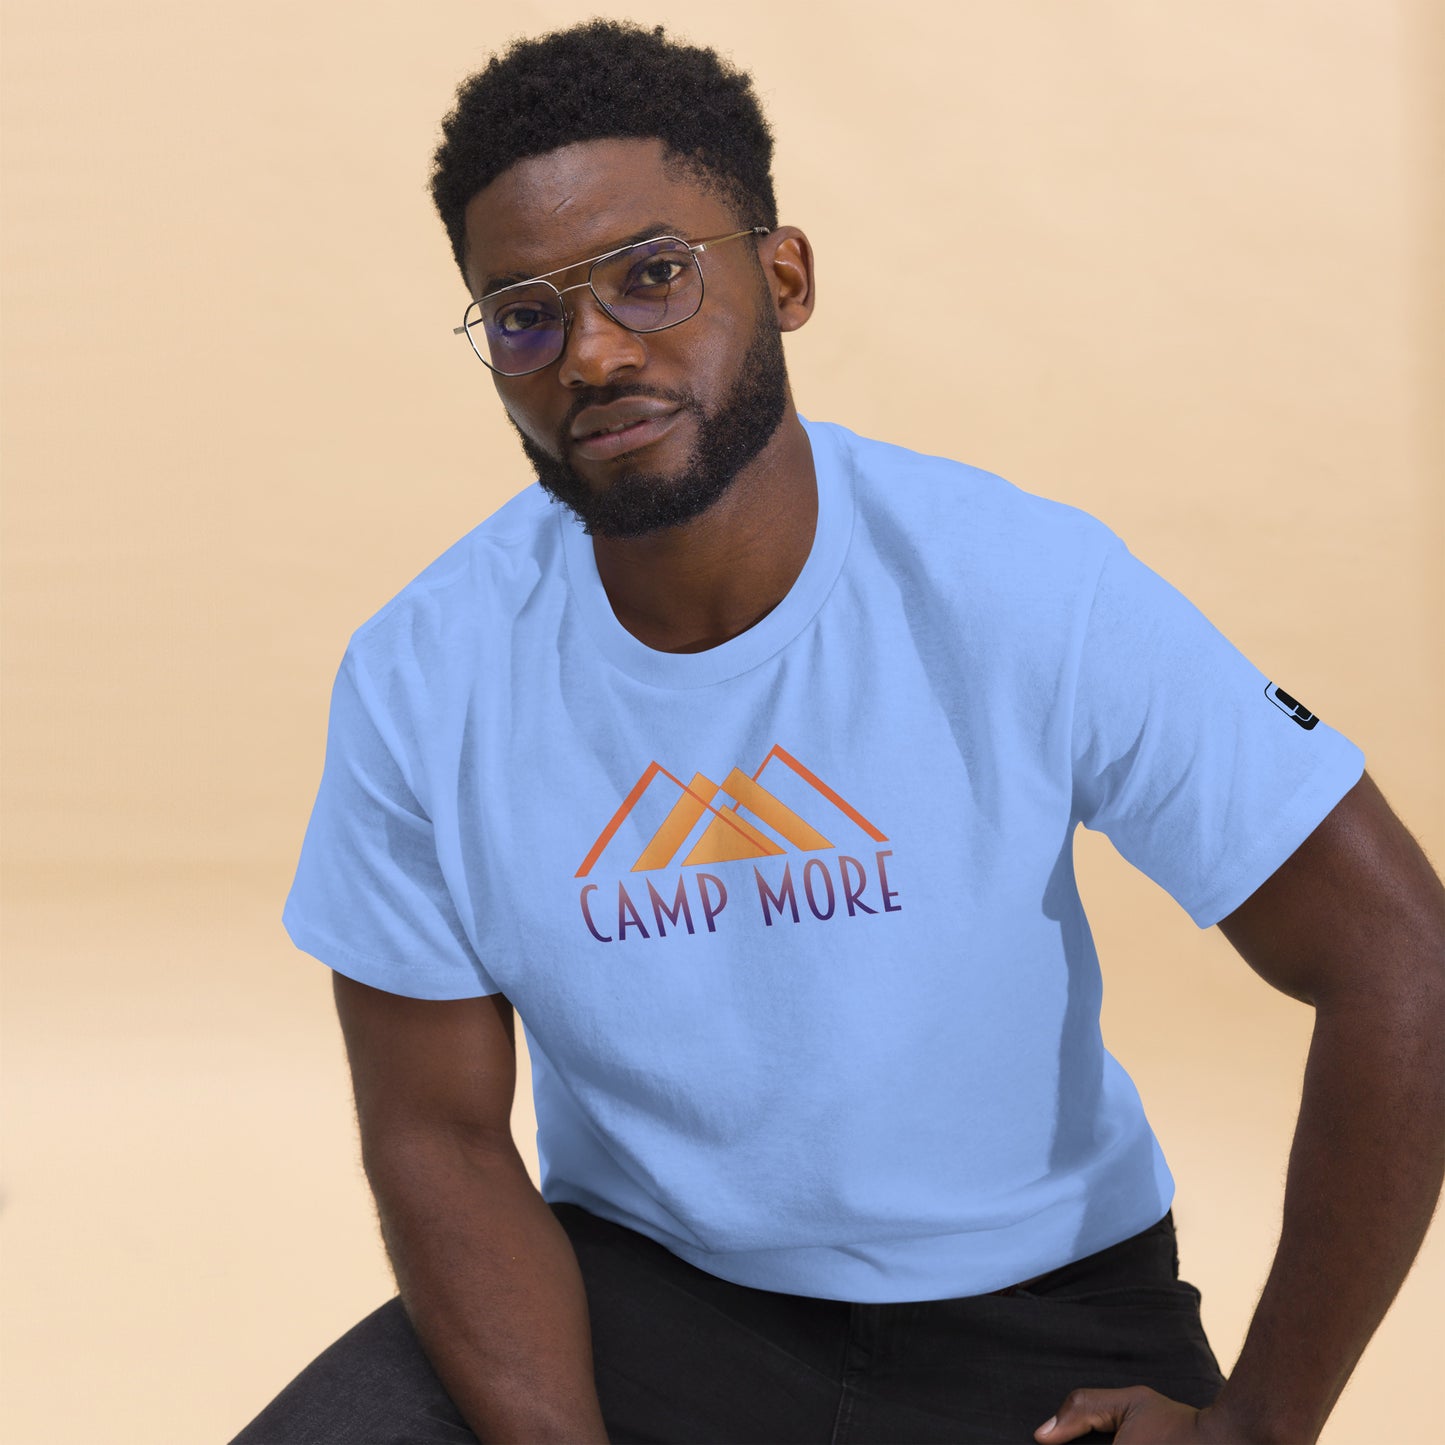 Man wearing glasses looking confidently at the camera, donned in a light blue t-shirt with the phrase 'CAMP MORE' in stylized orange lettering below a minimalist mountain graphic, complete with a logo patch on the sleeve, set against a soft beige background.